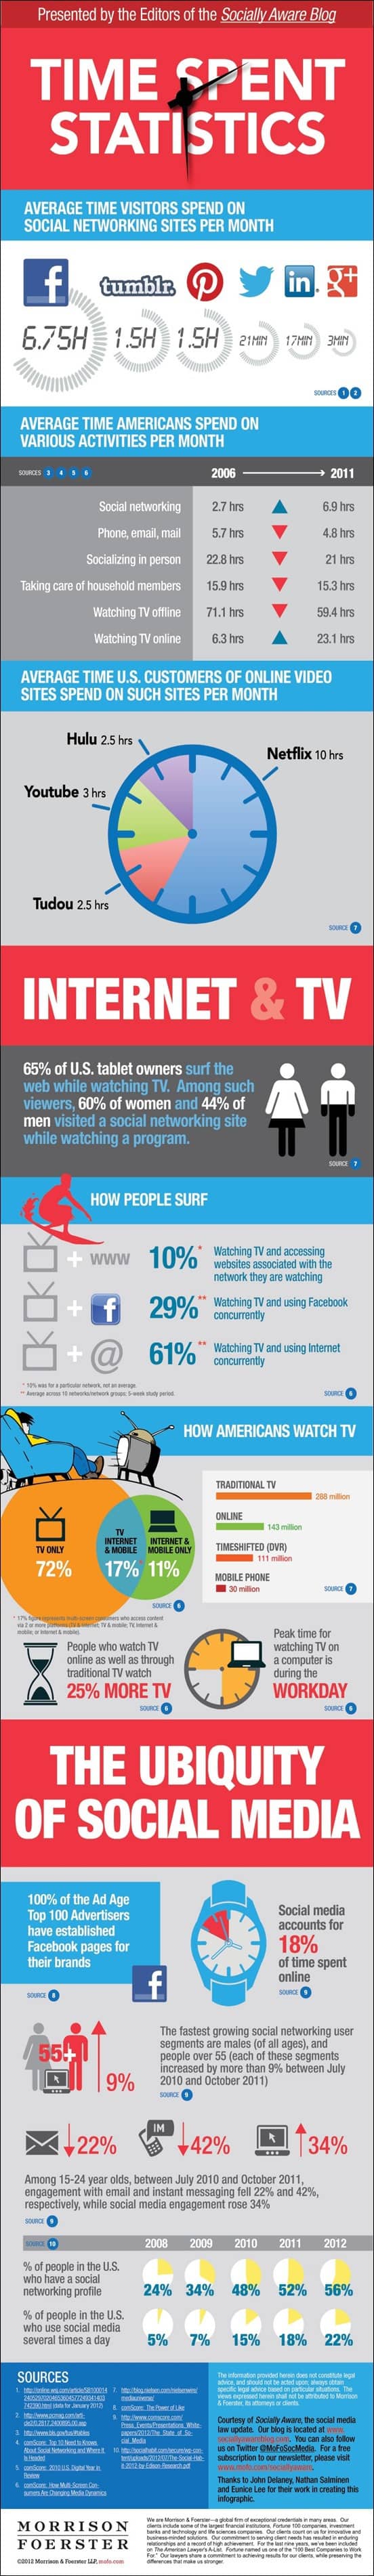 how-social-media-usage-will-change-in-2013